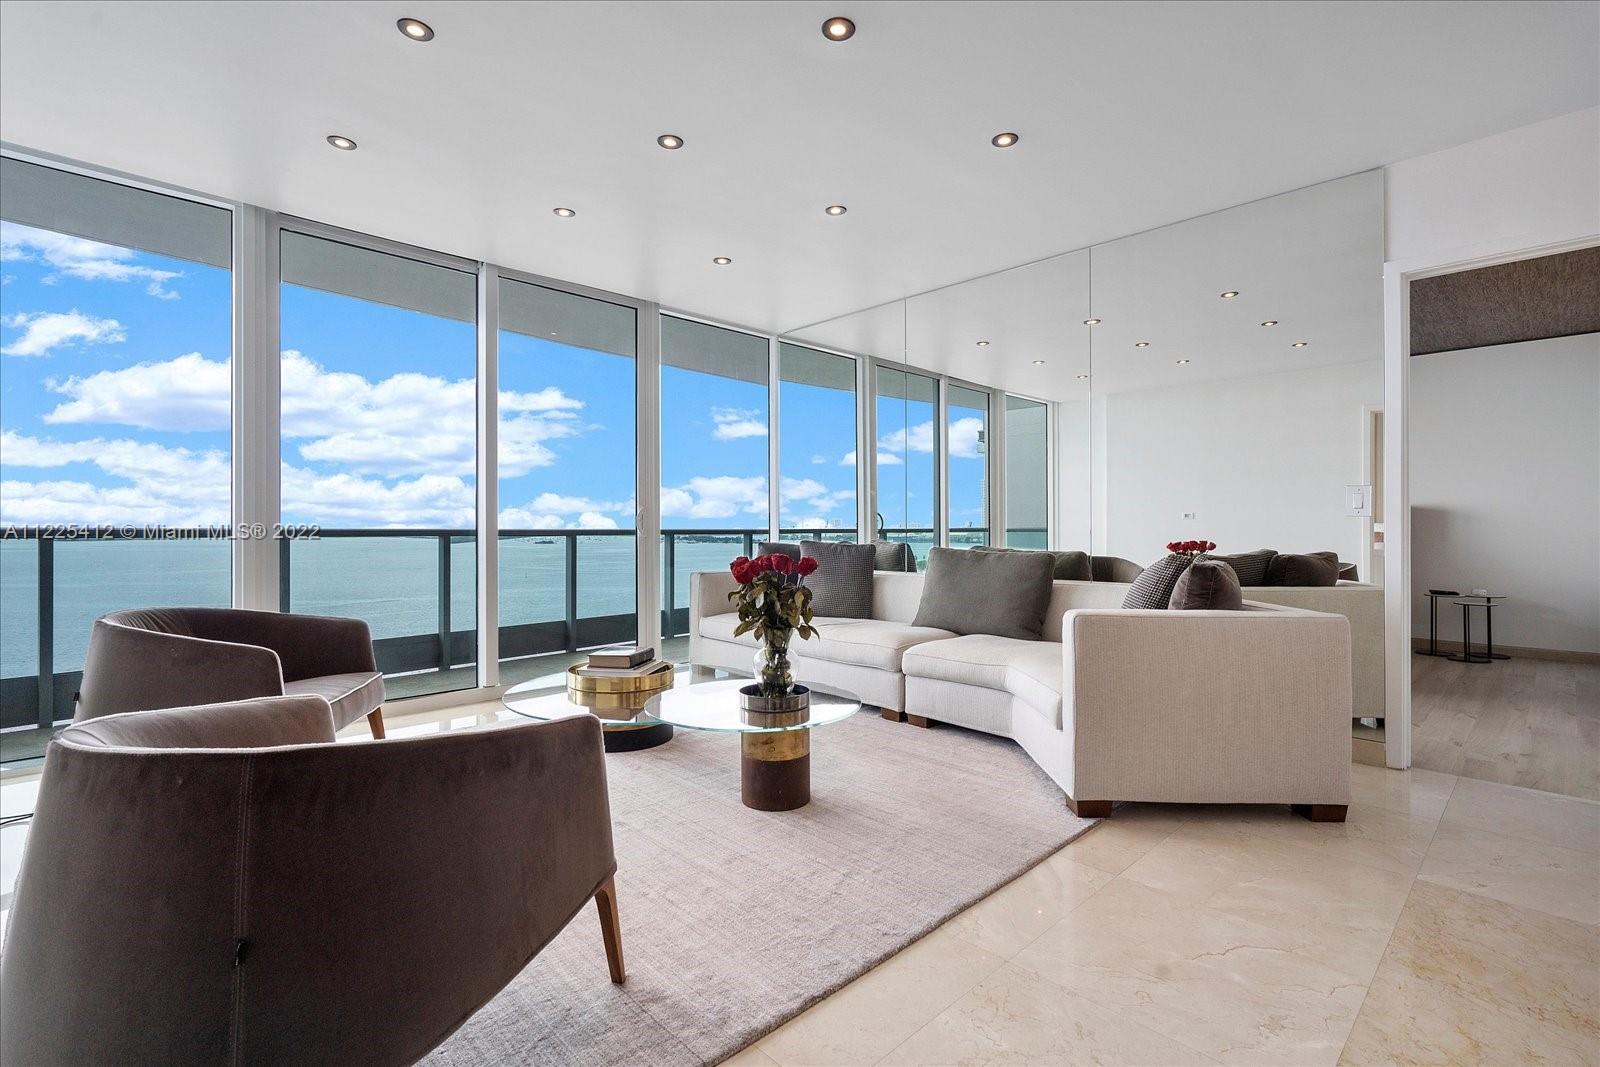 Welcome to Jade residence at Brickell bay , one of the few truly waterfront and luxury buildings in 